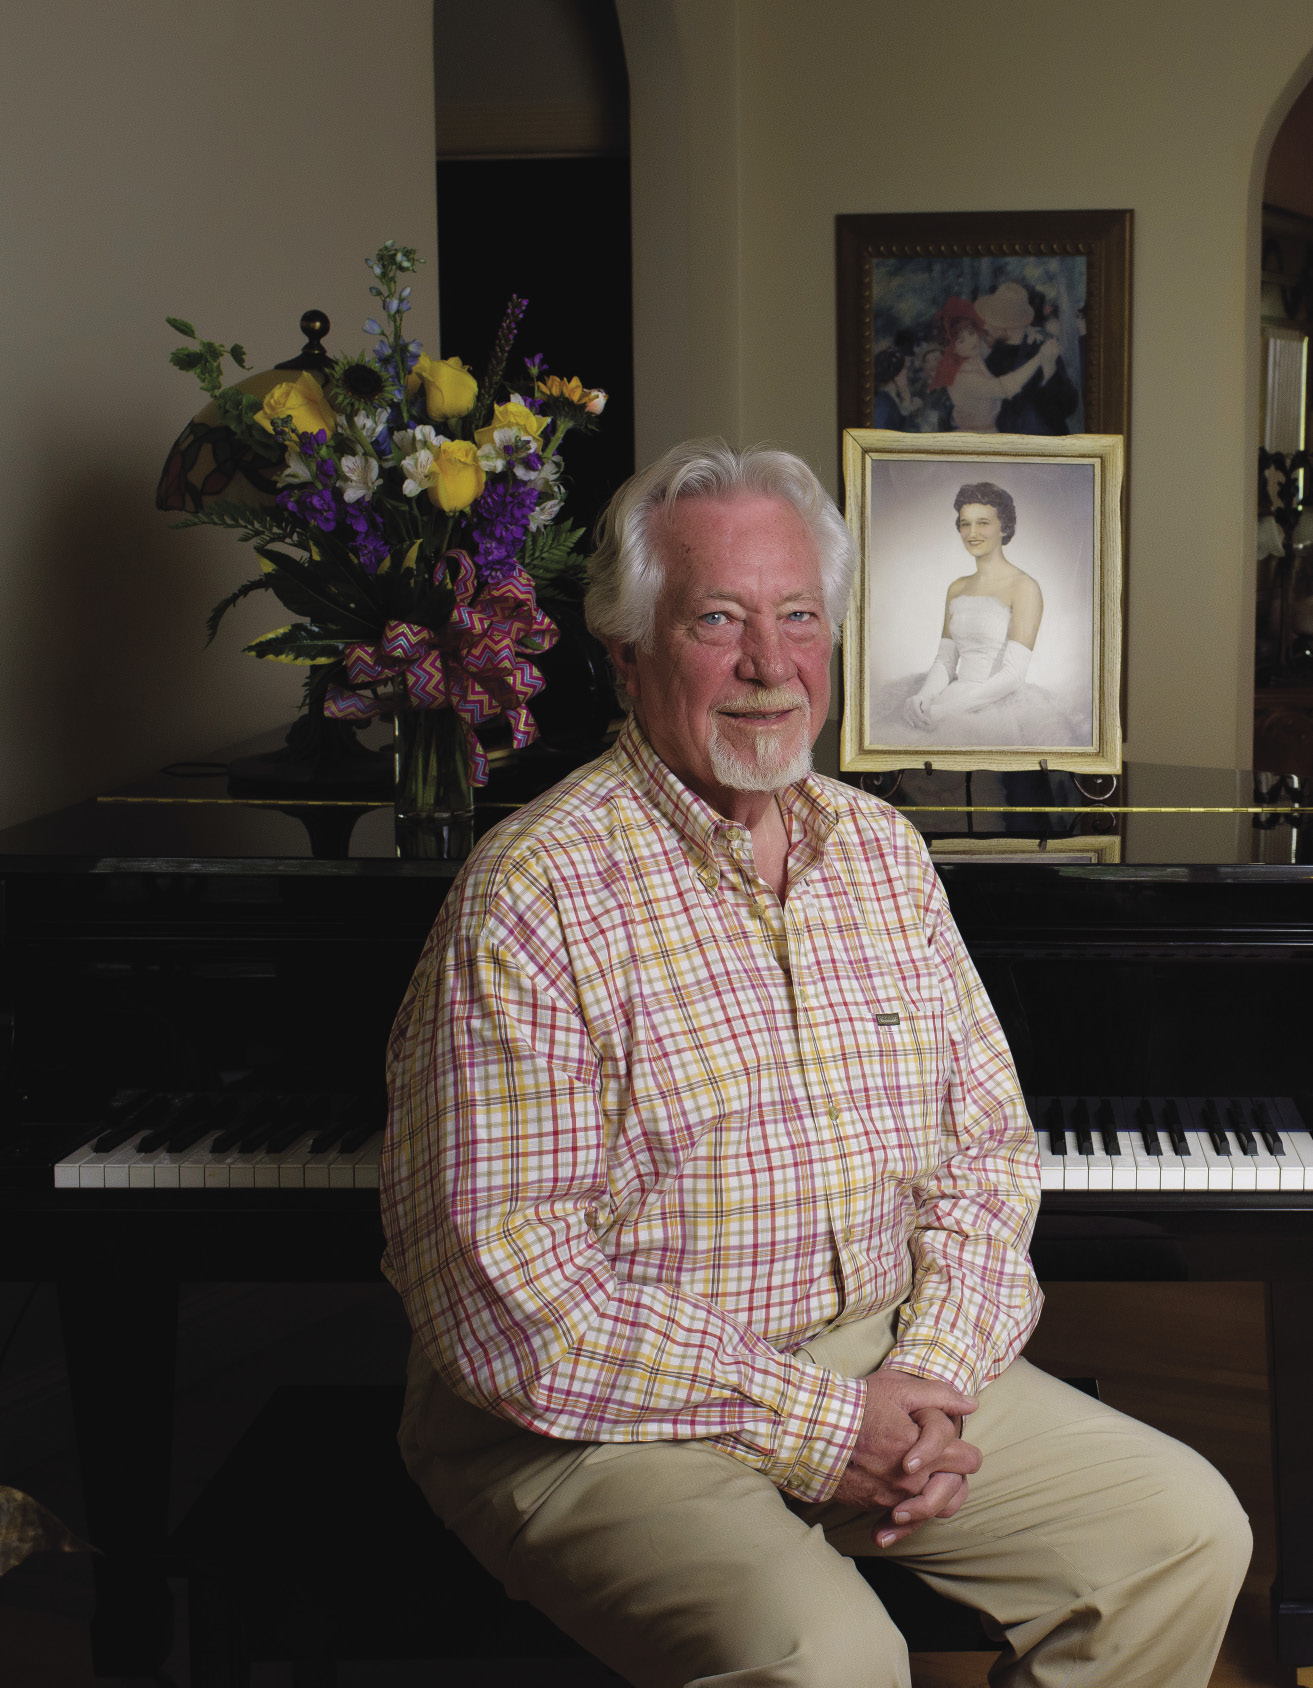 Michael Hale sitting in front of a piano with flowers and a framed picture of late wife, Vicki M. Smith, on top.